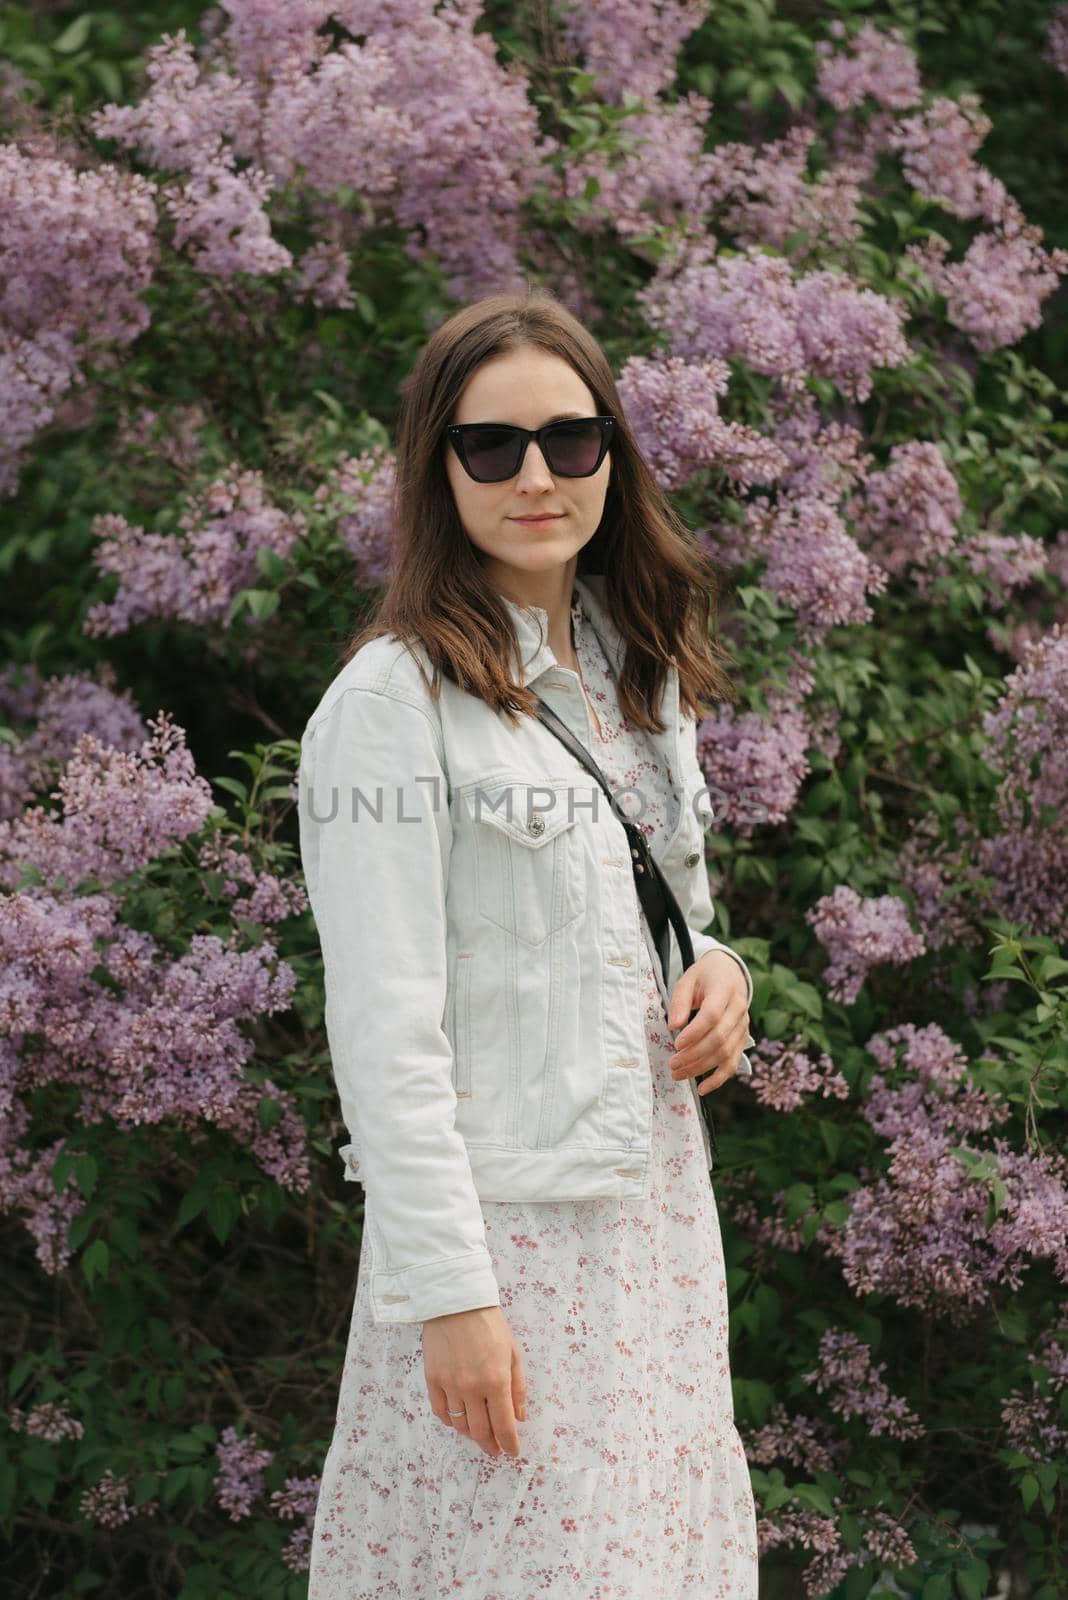 A woman is staying near the lilac bush in the village green. A lady in black sunglasses is posing in the woodland.